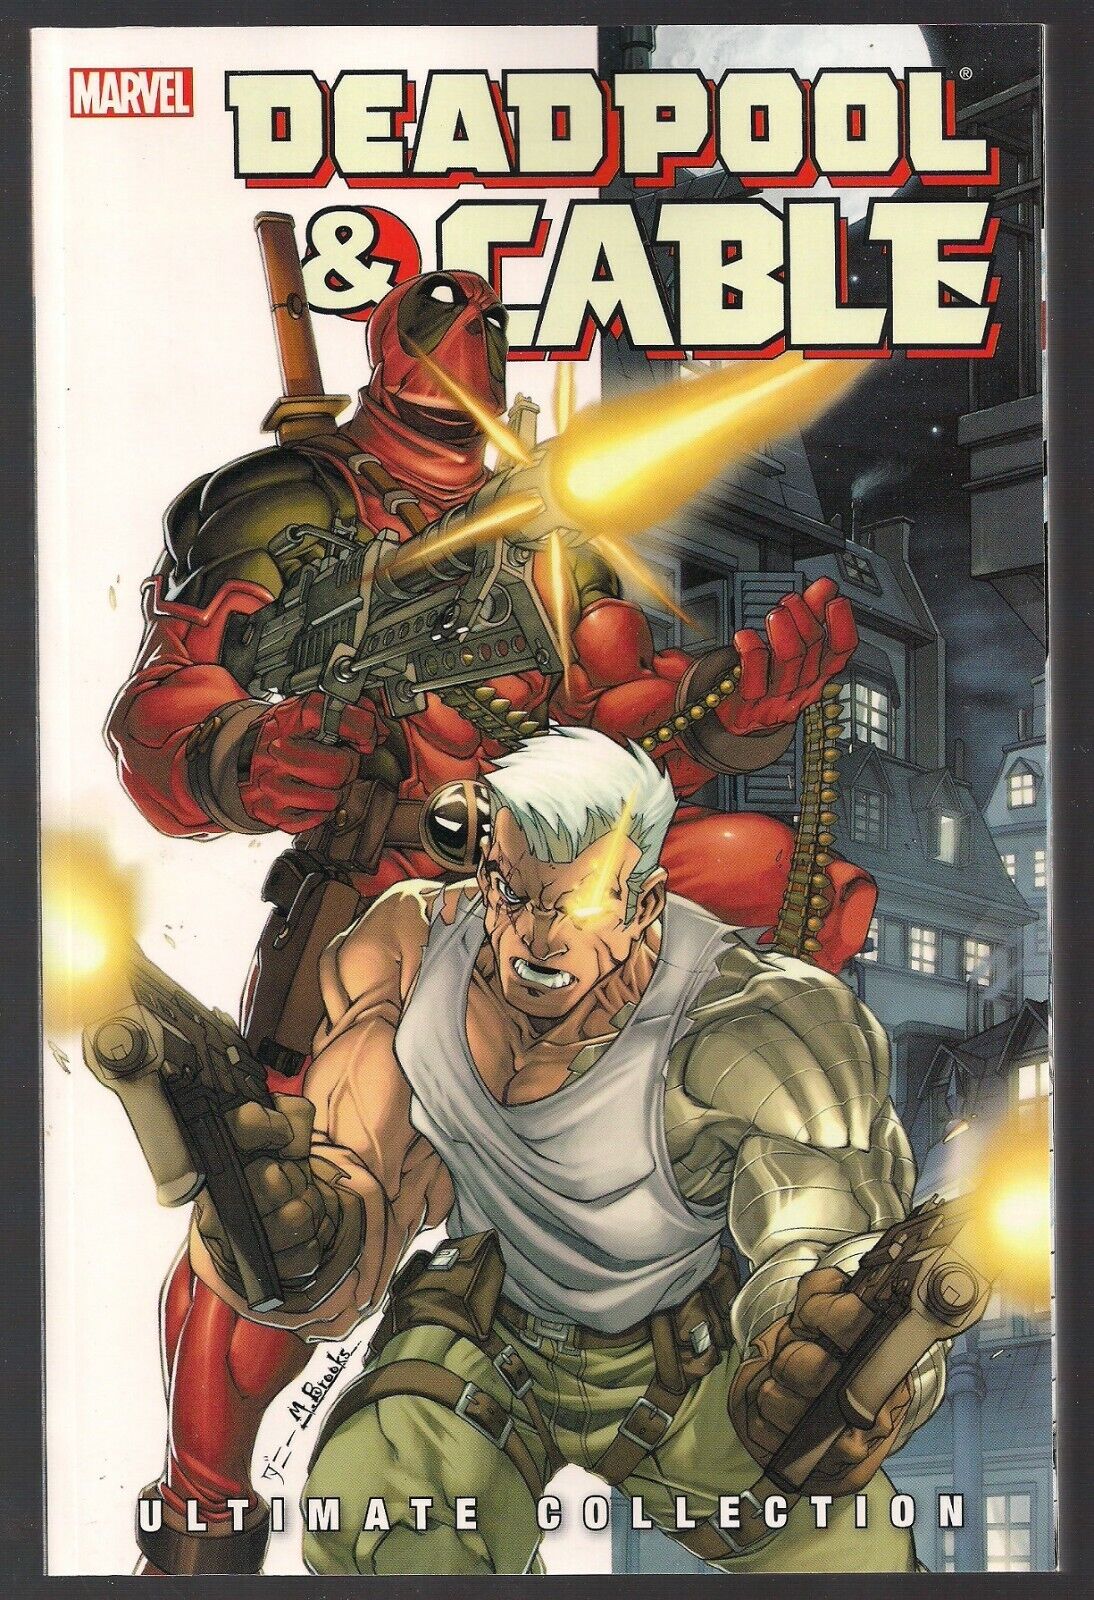 DEADPOOL & CABLE ULTIMATE COLLECTION VOL 1 MARVEL 2010 SOFTCVR GN TPB #1-18+ NEW